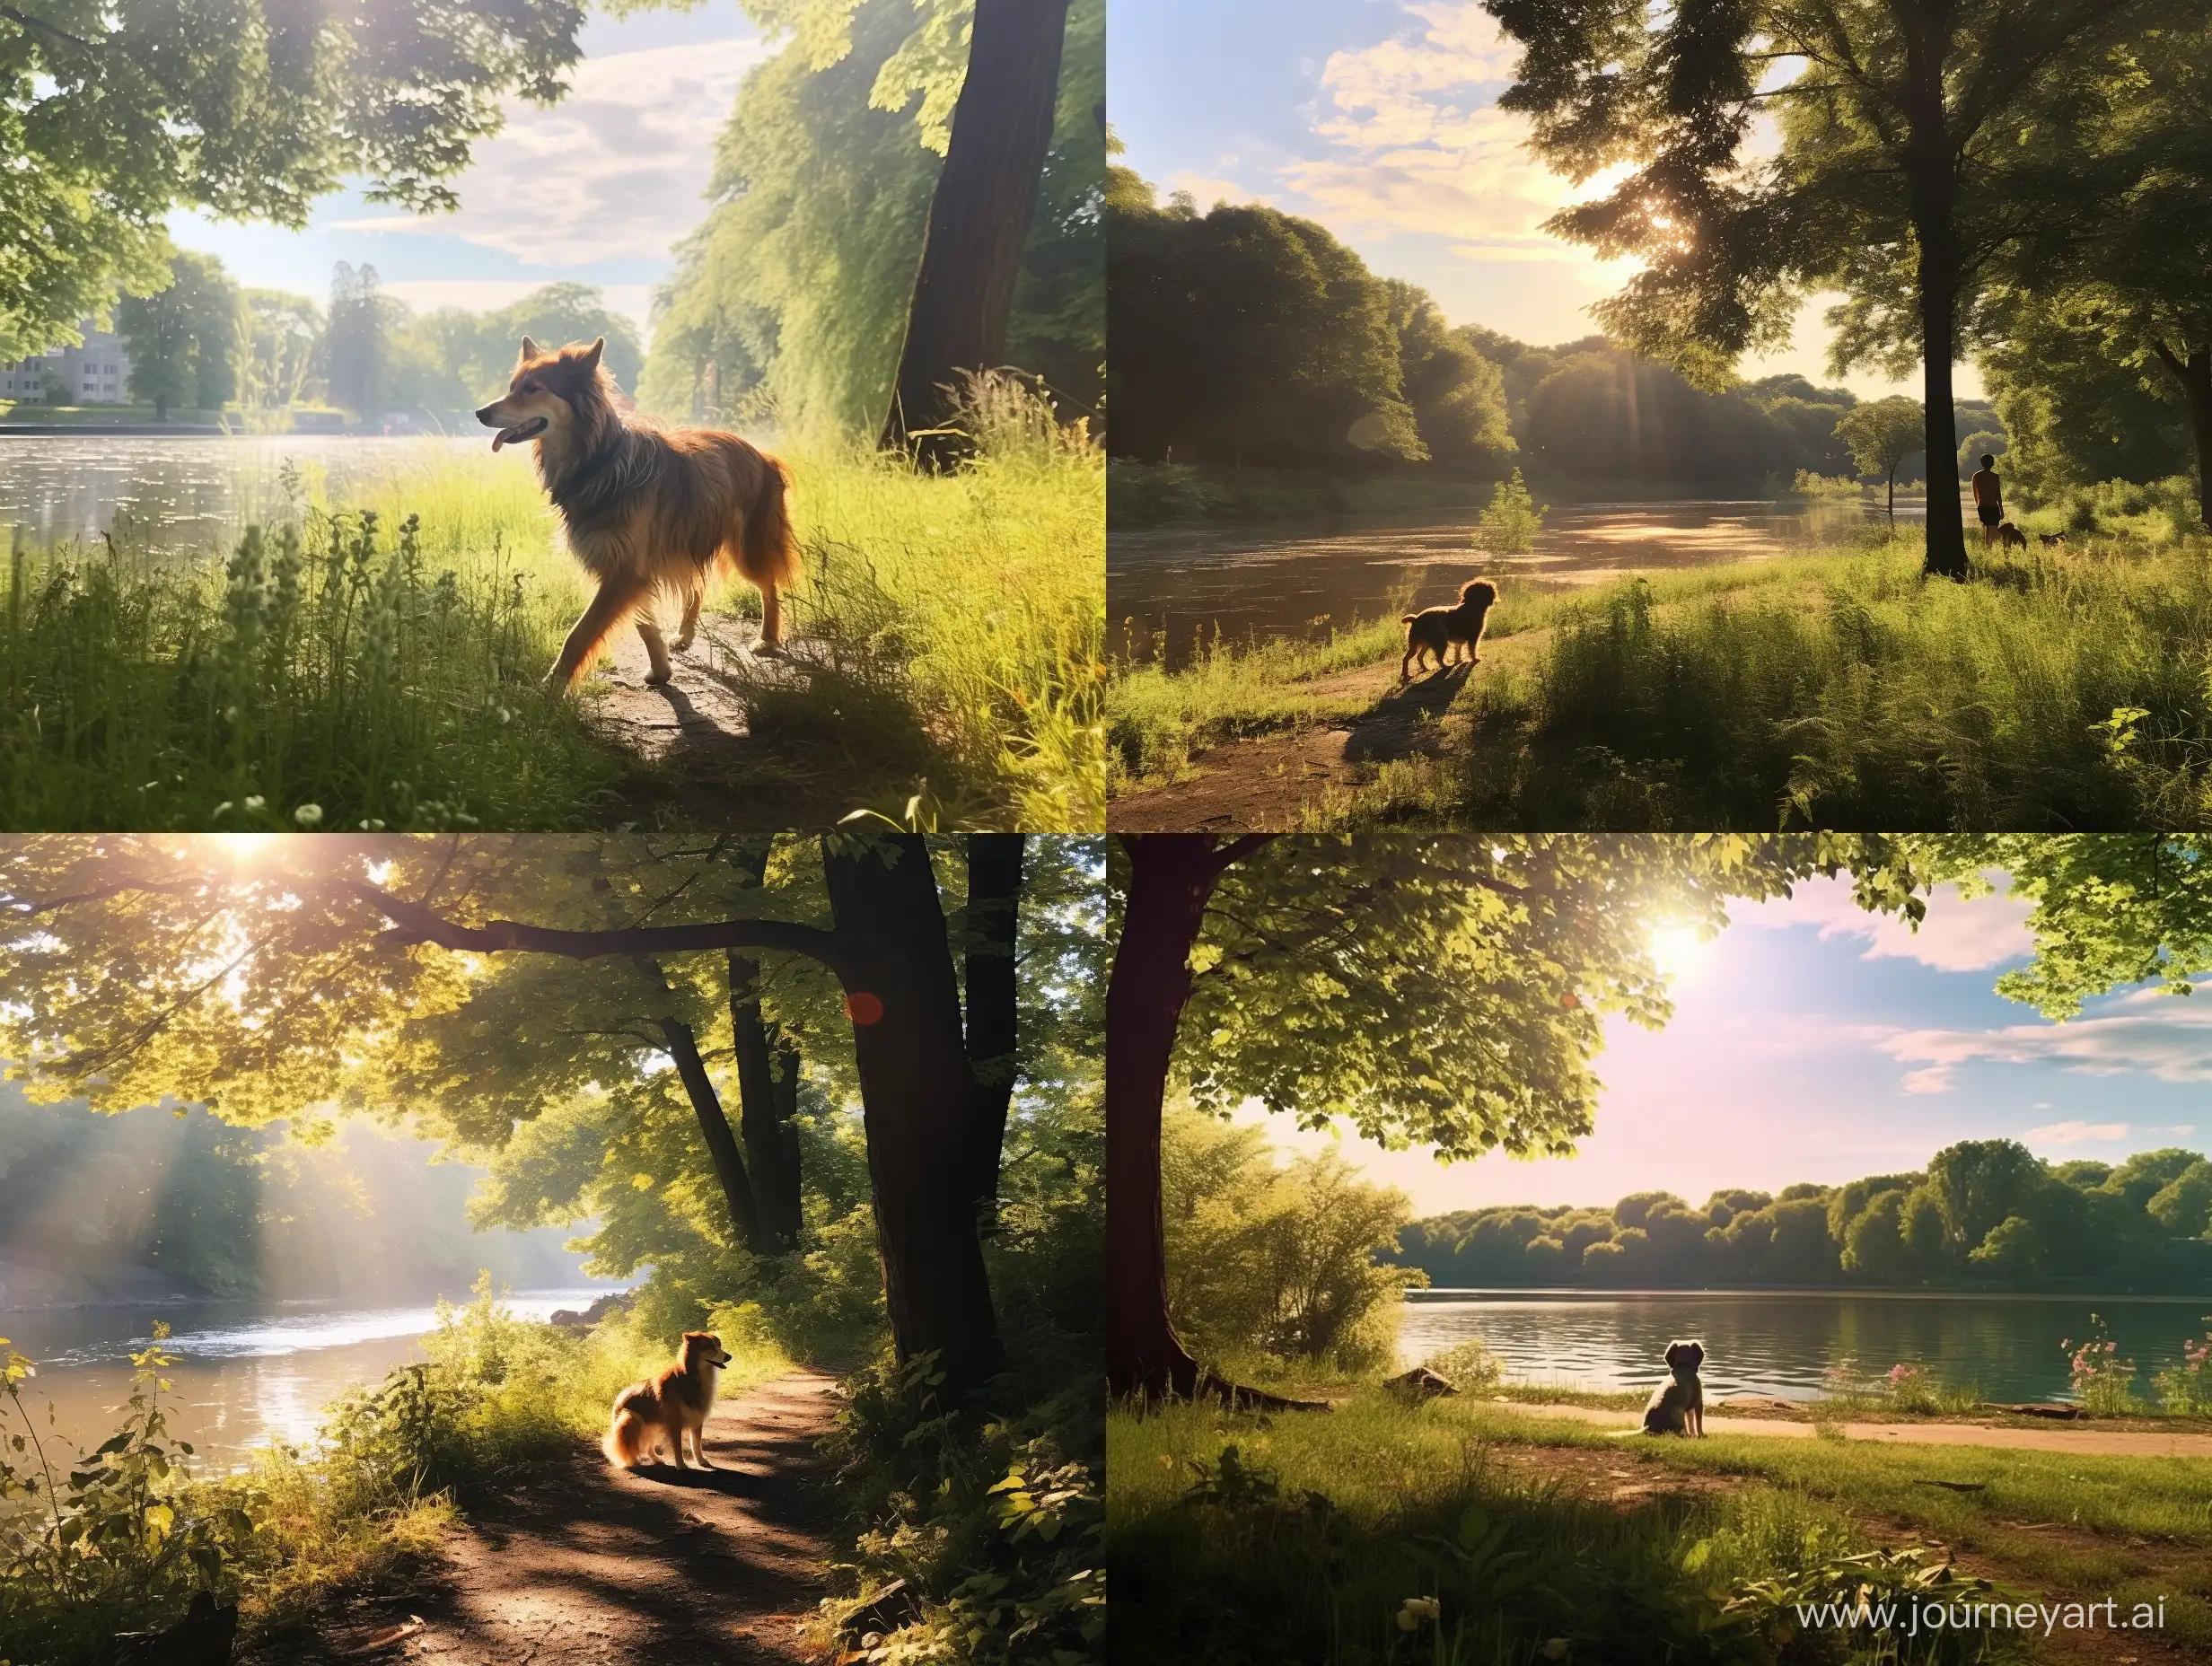 As I walked through the park near the river with my dog Max, the sun was shining brightly, and the atmosphere was peaceful.